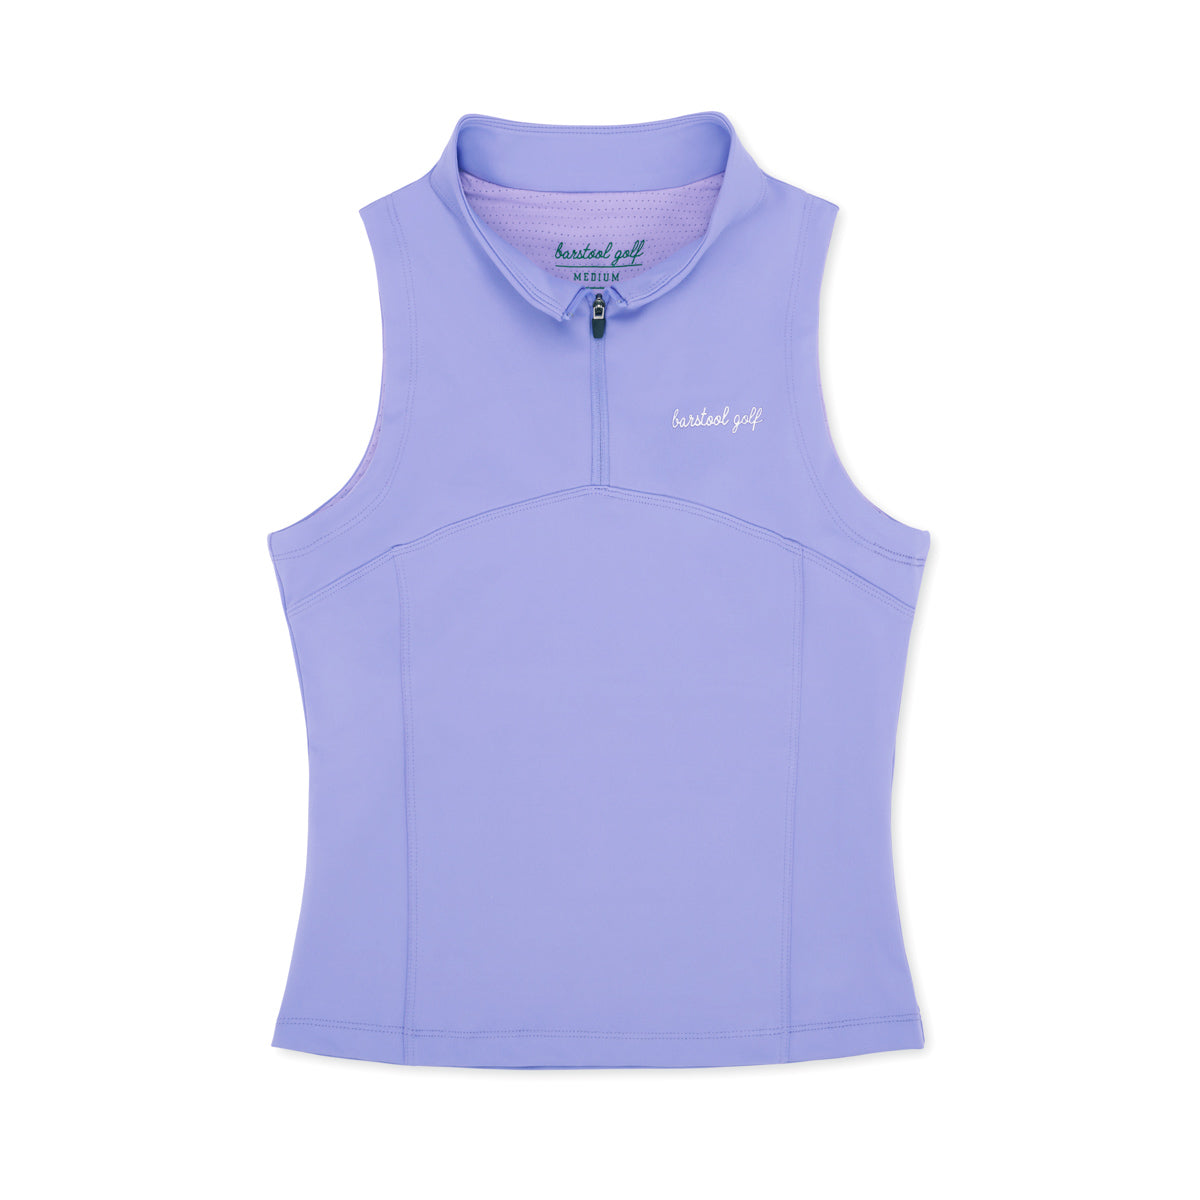 Barstool Golf Women's Sleeveless Solid Top II - Fore Play Clothing